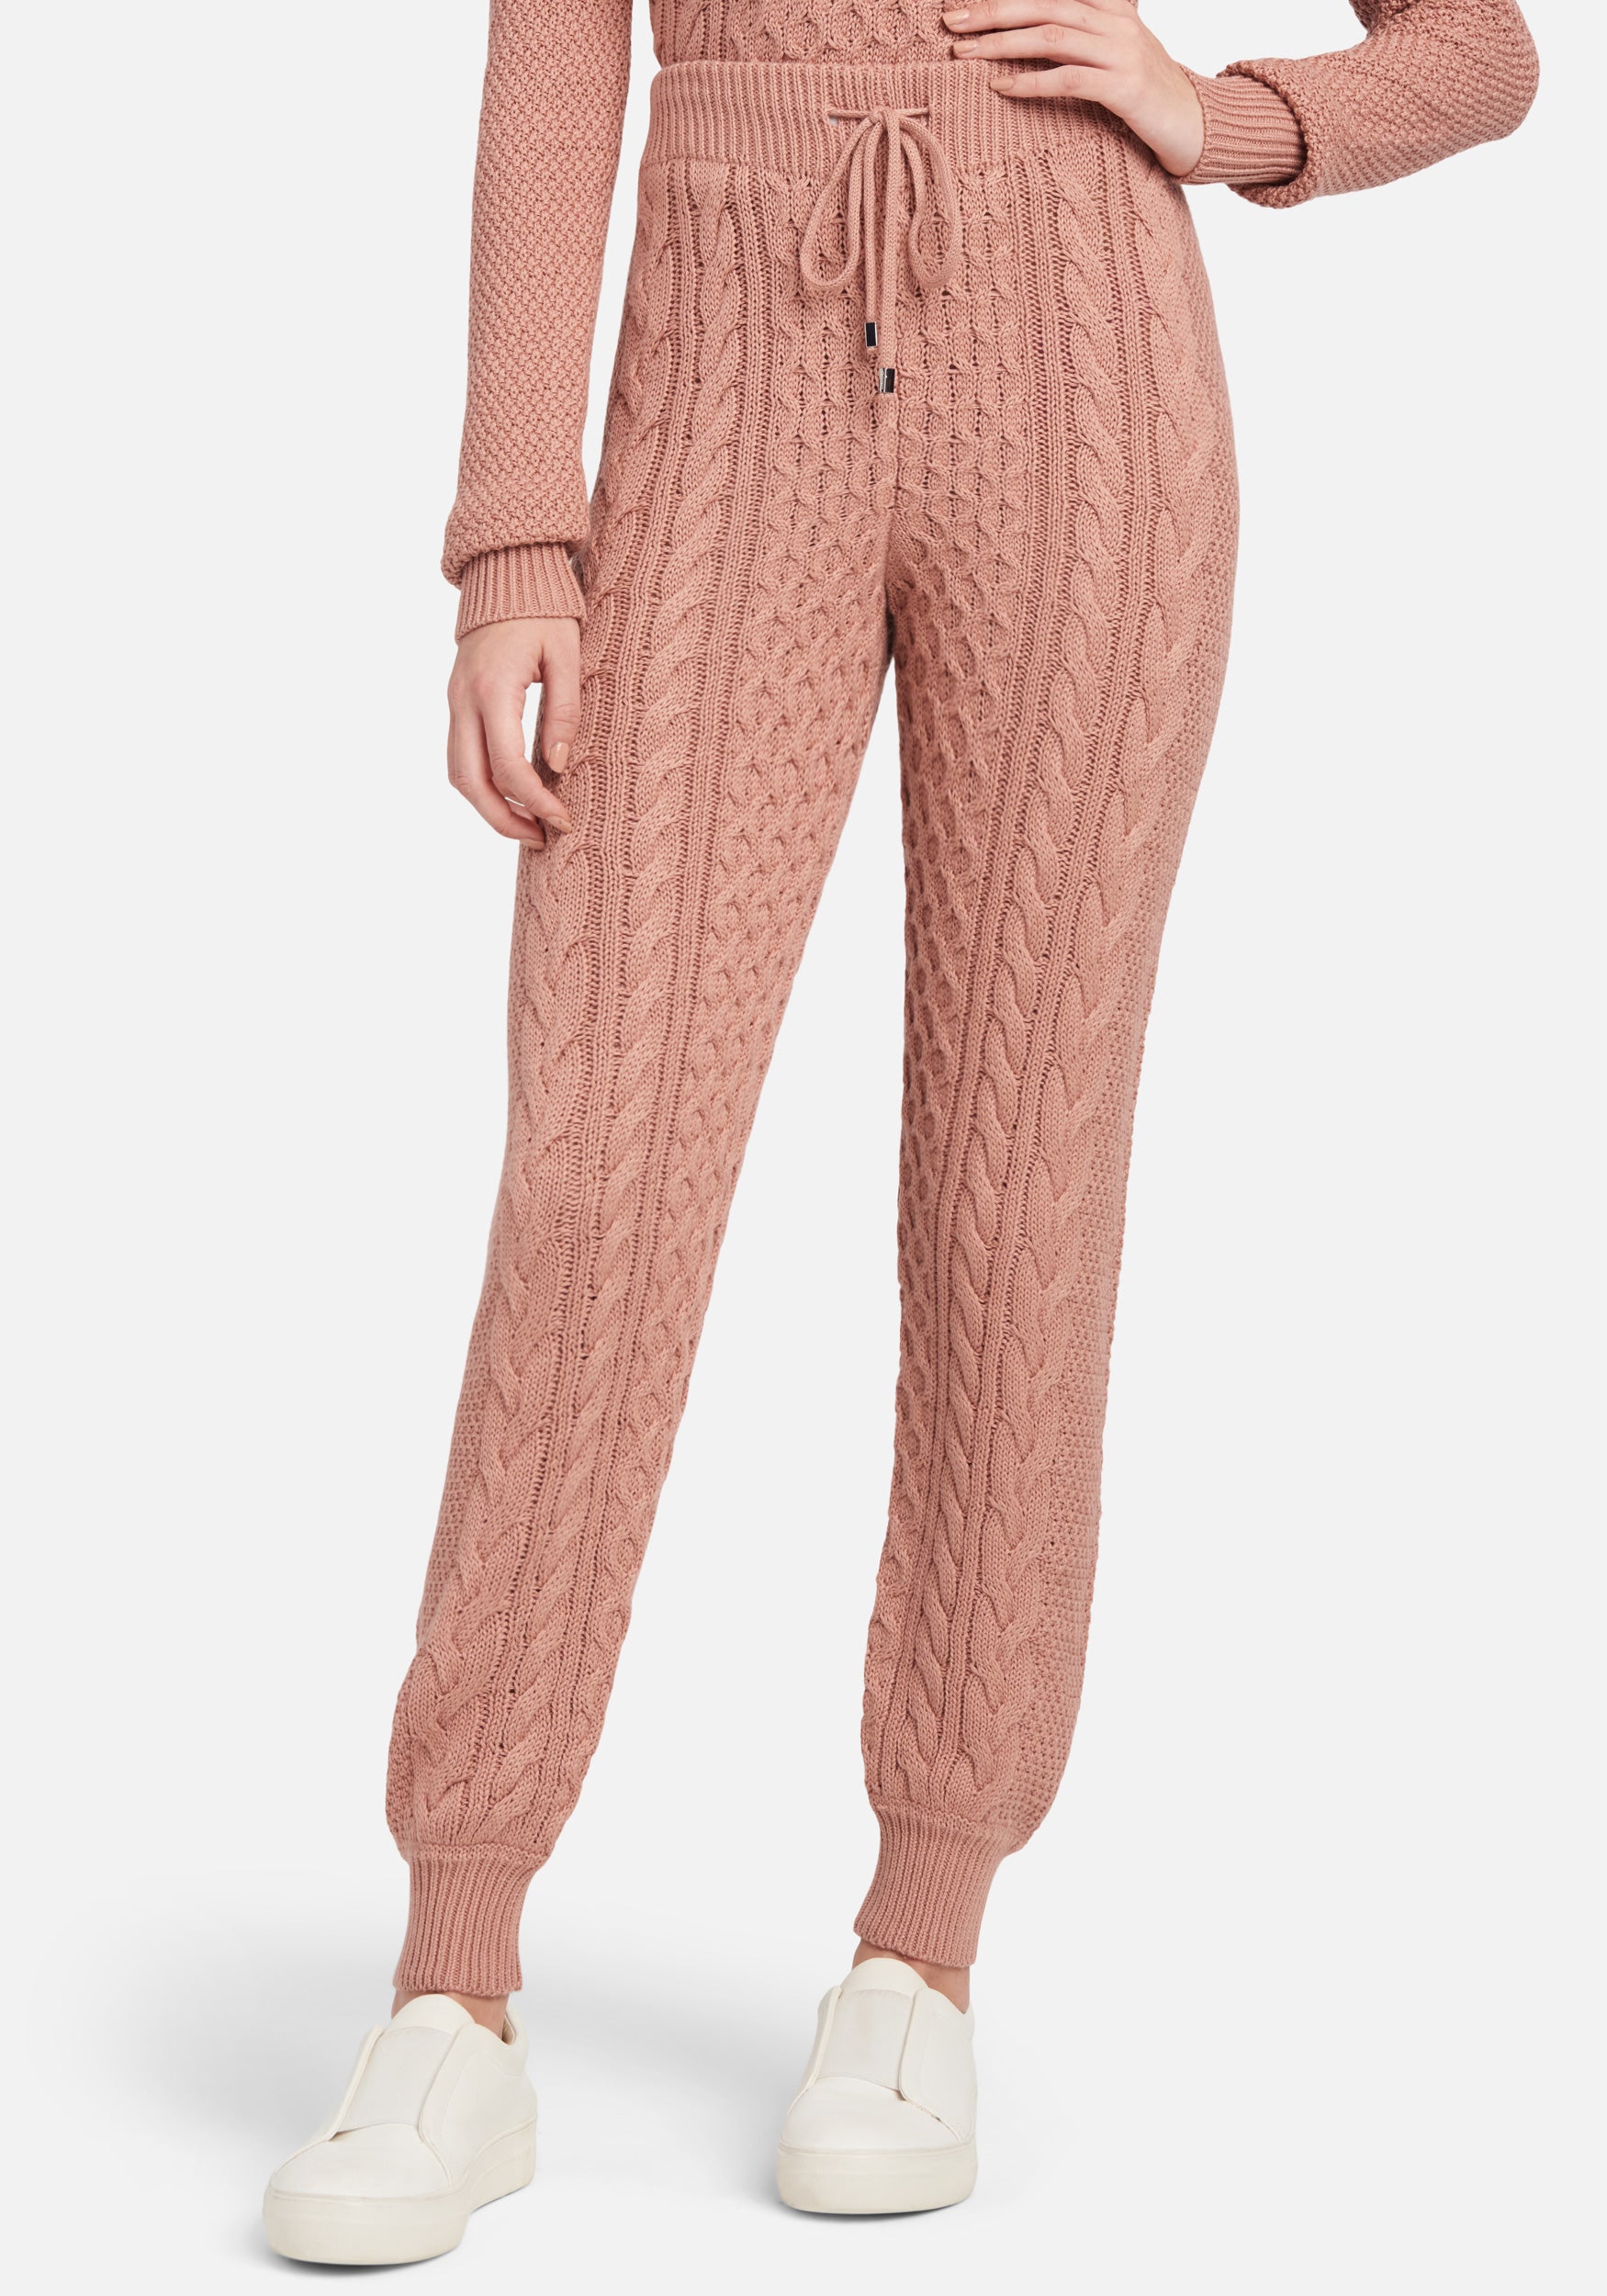 Buy Cable Knit Sweater Pants Online Nepal